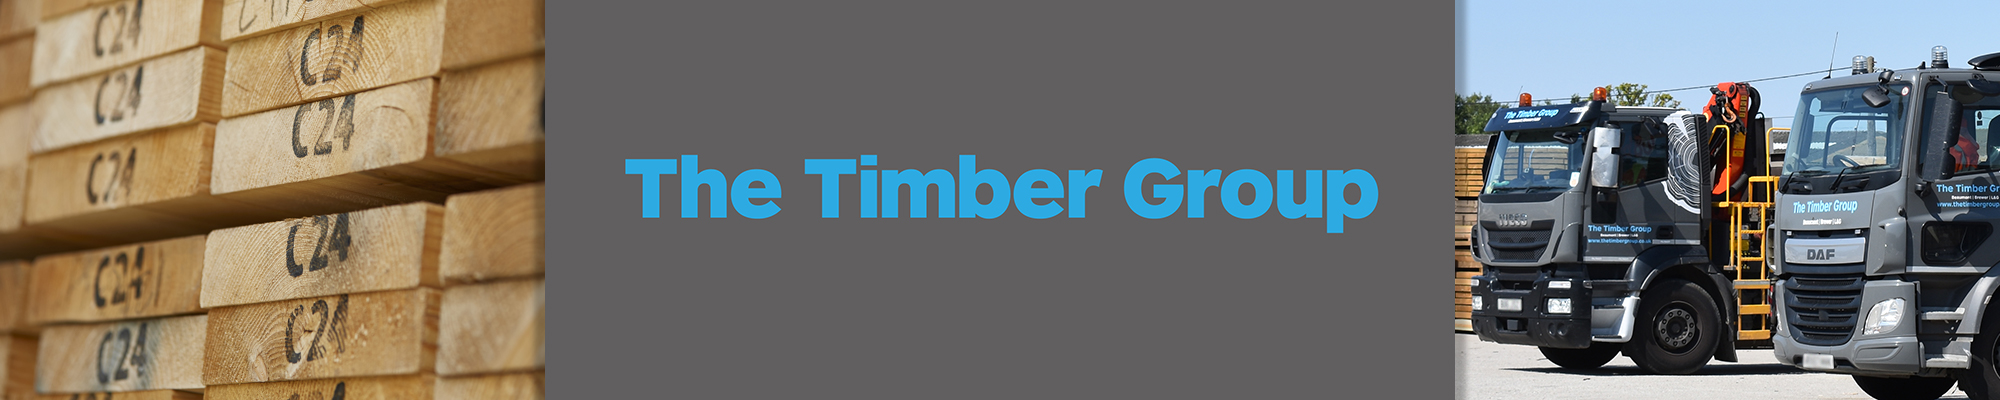 About The Timber Group